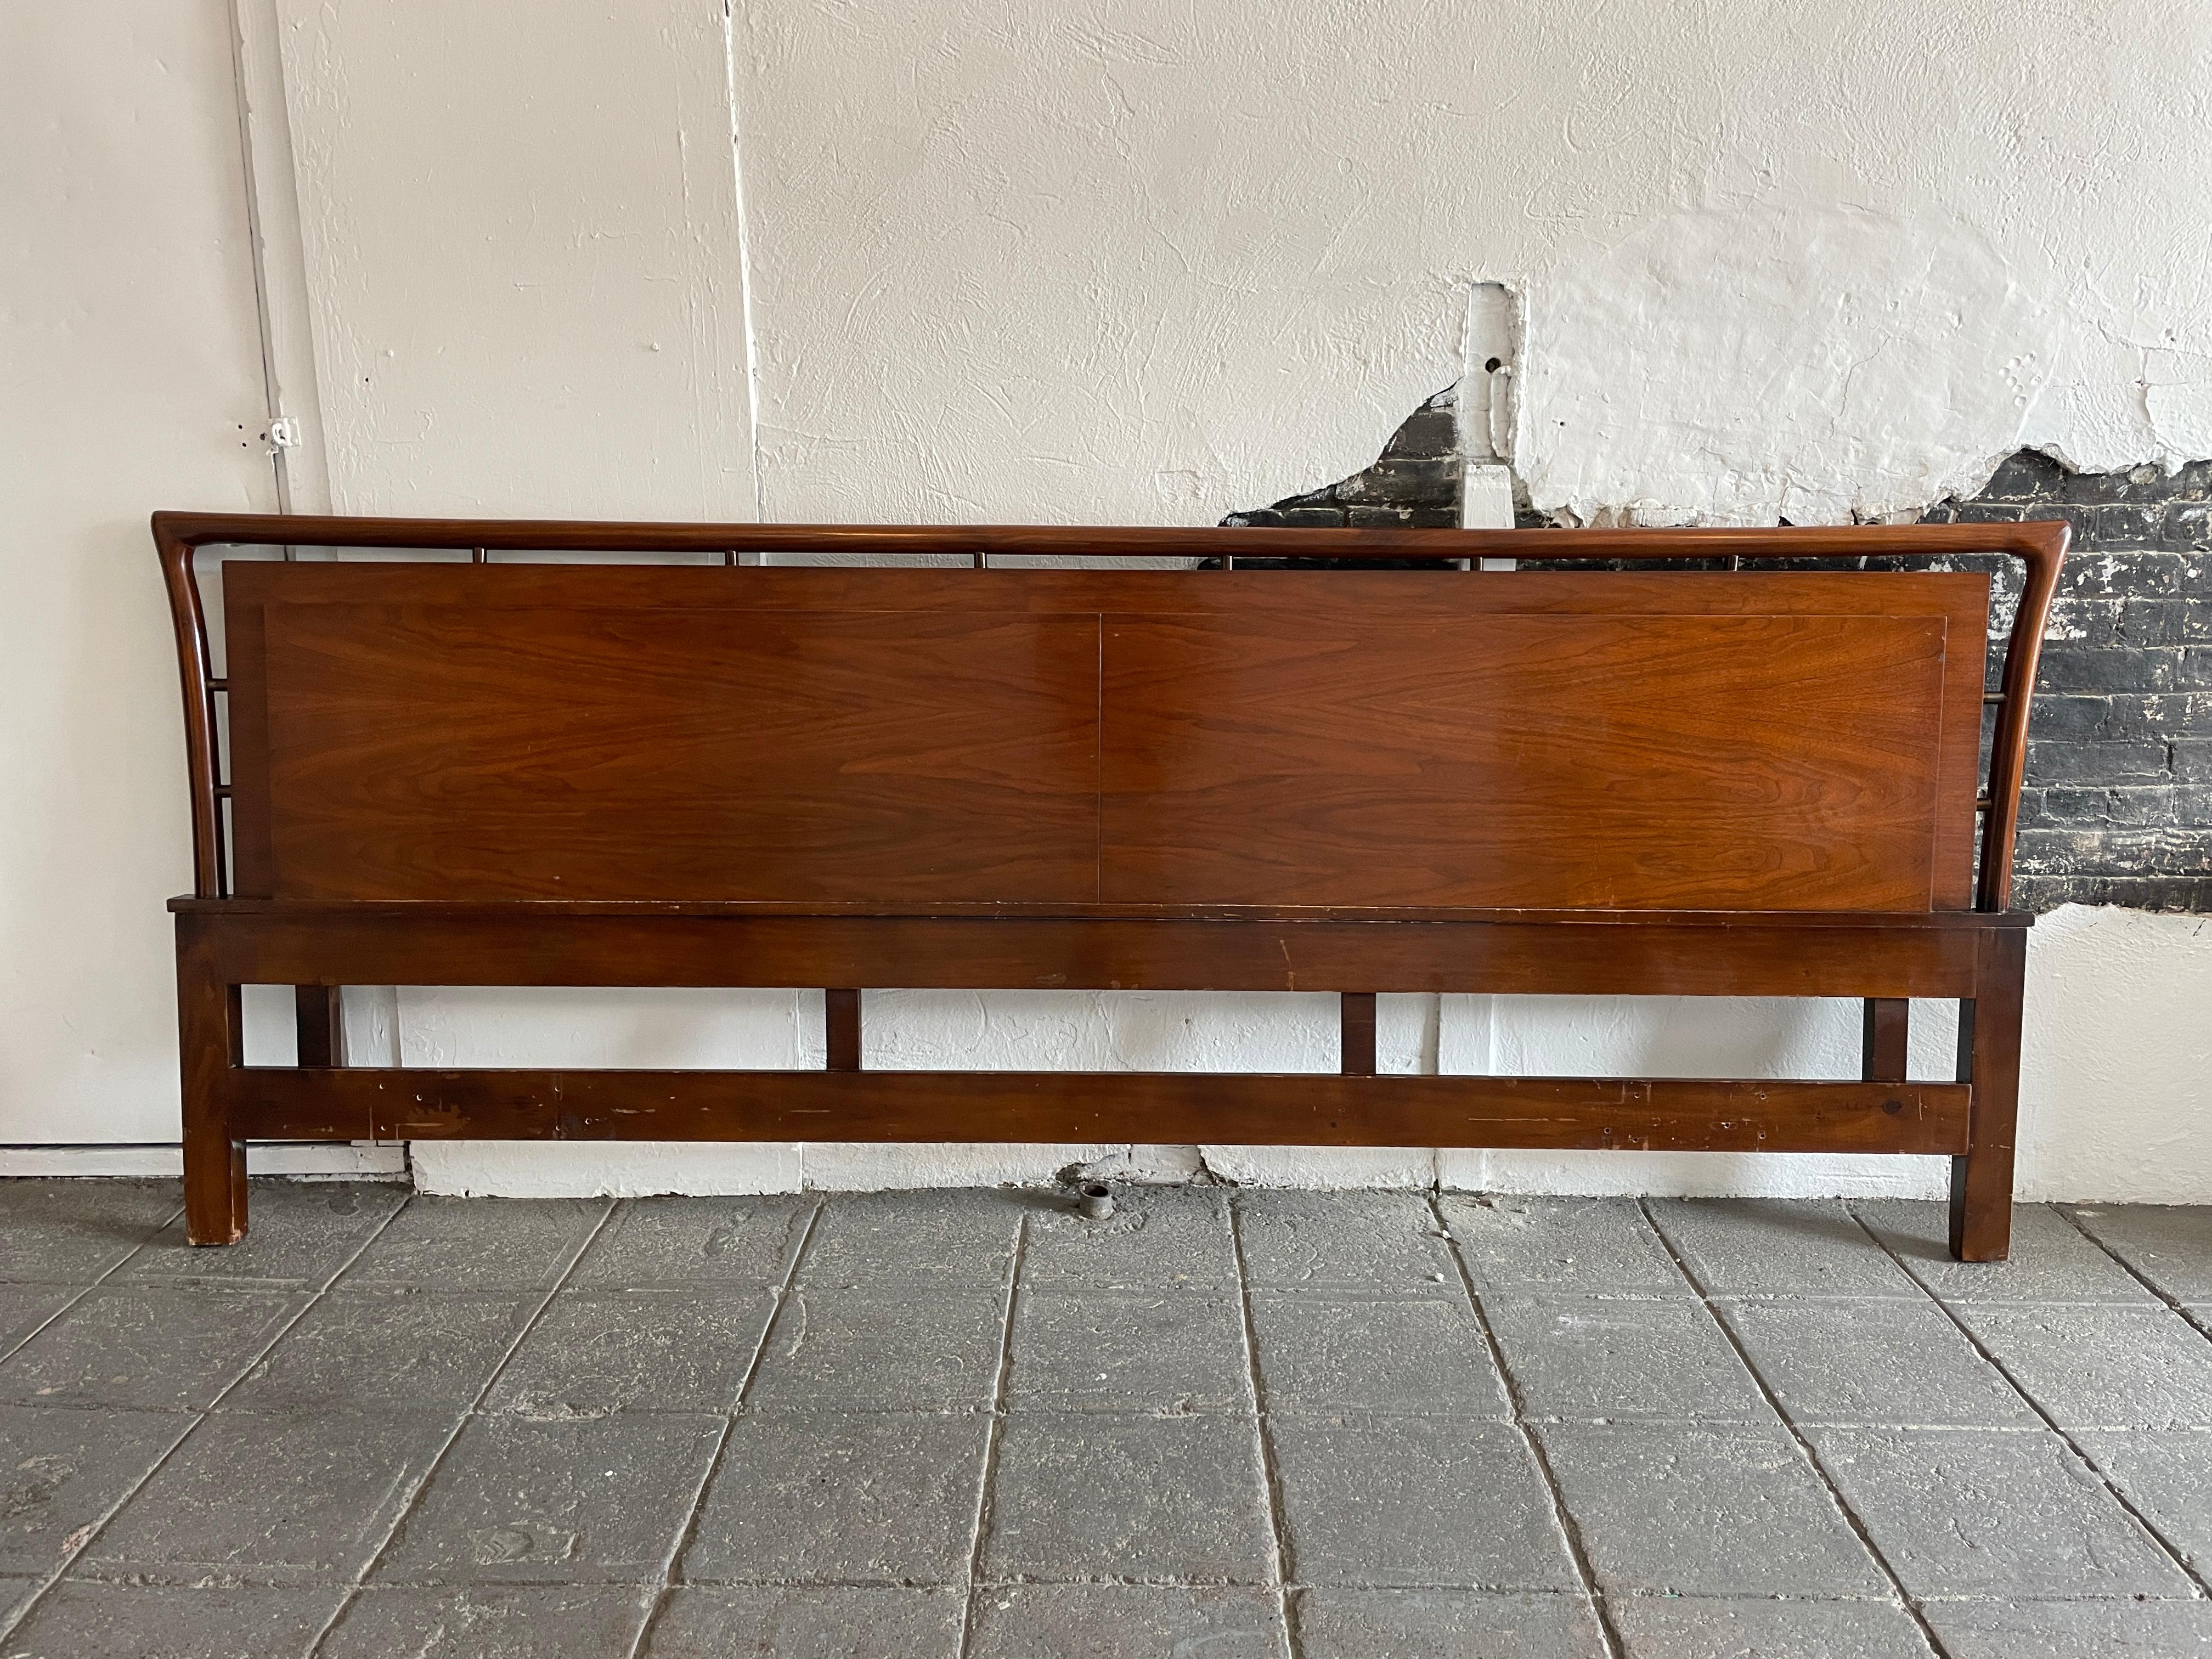 Beautiful American mid century King bed headboard in excellent vintage condition with sculpted wood details with brass accents. finely crafted. Fits a King sized mattress. Bed Headboard only NO metal bed Frame. Easily mounts to all bed frames.